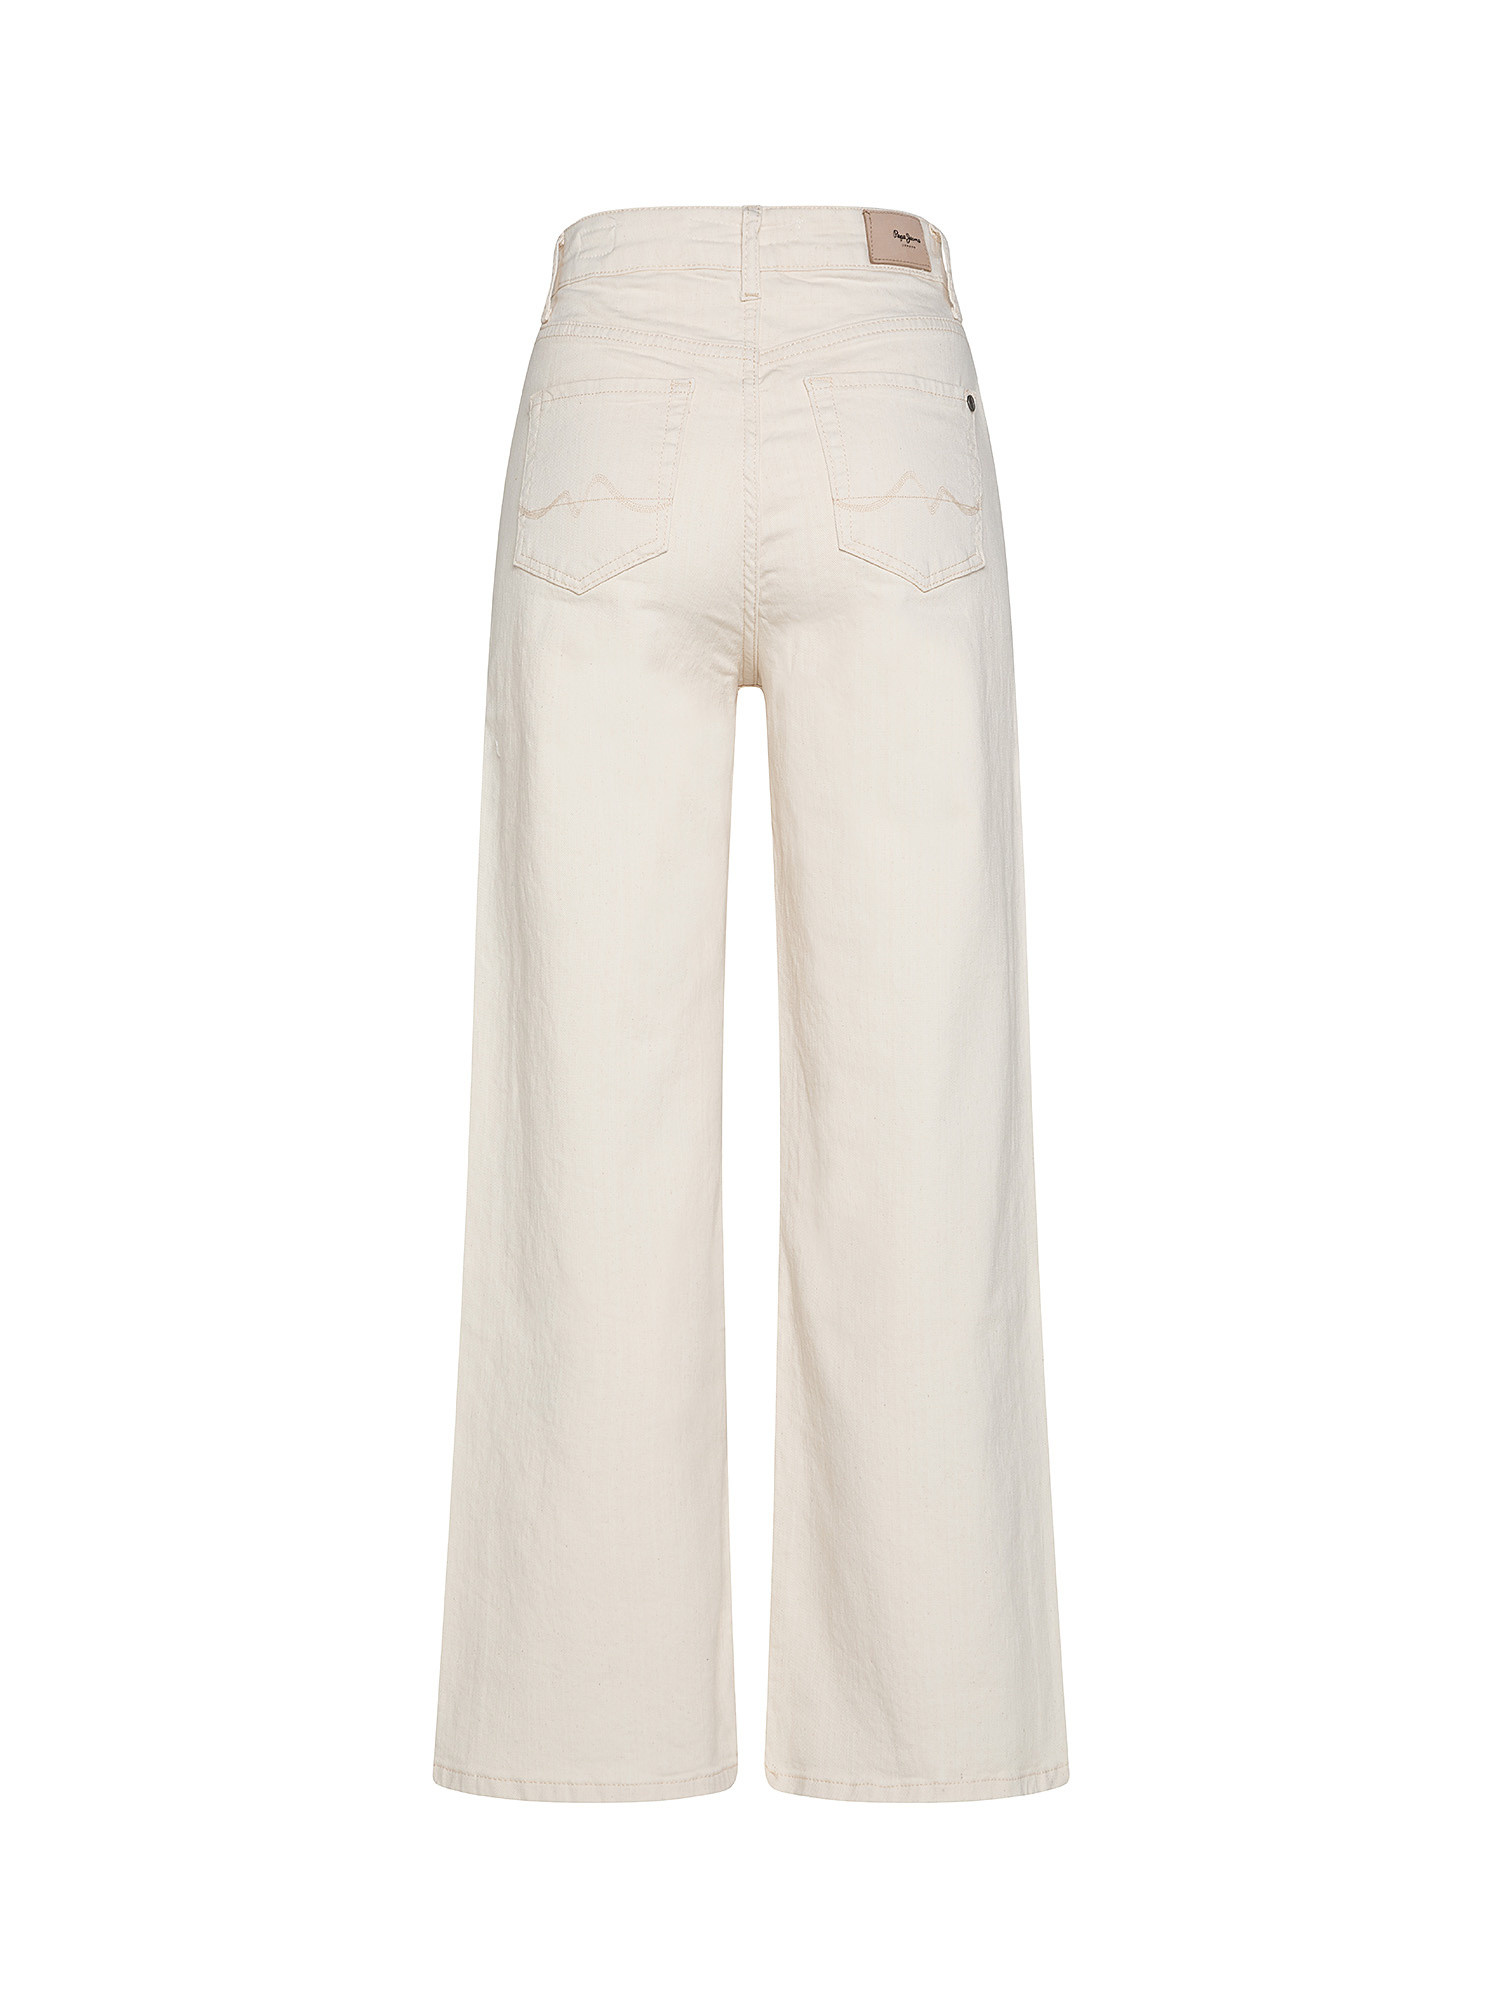 Lexa sky wide fit high waist jeans, White Cream, large image number 1